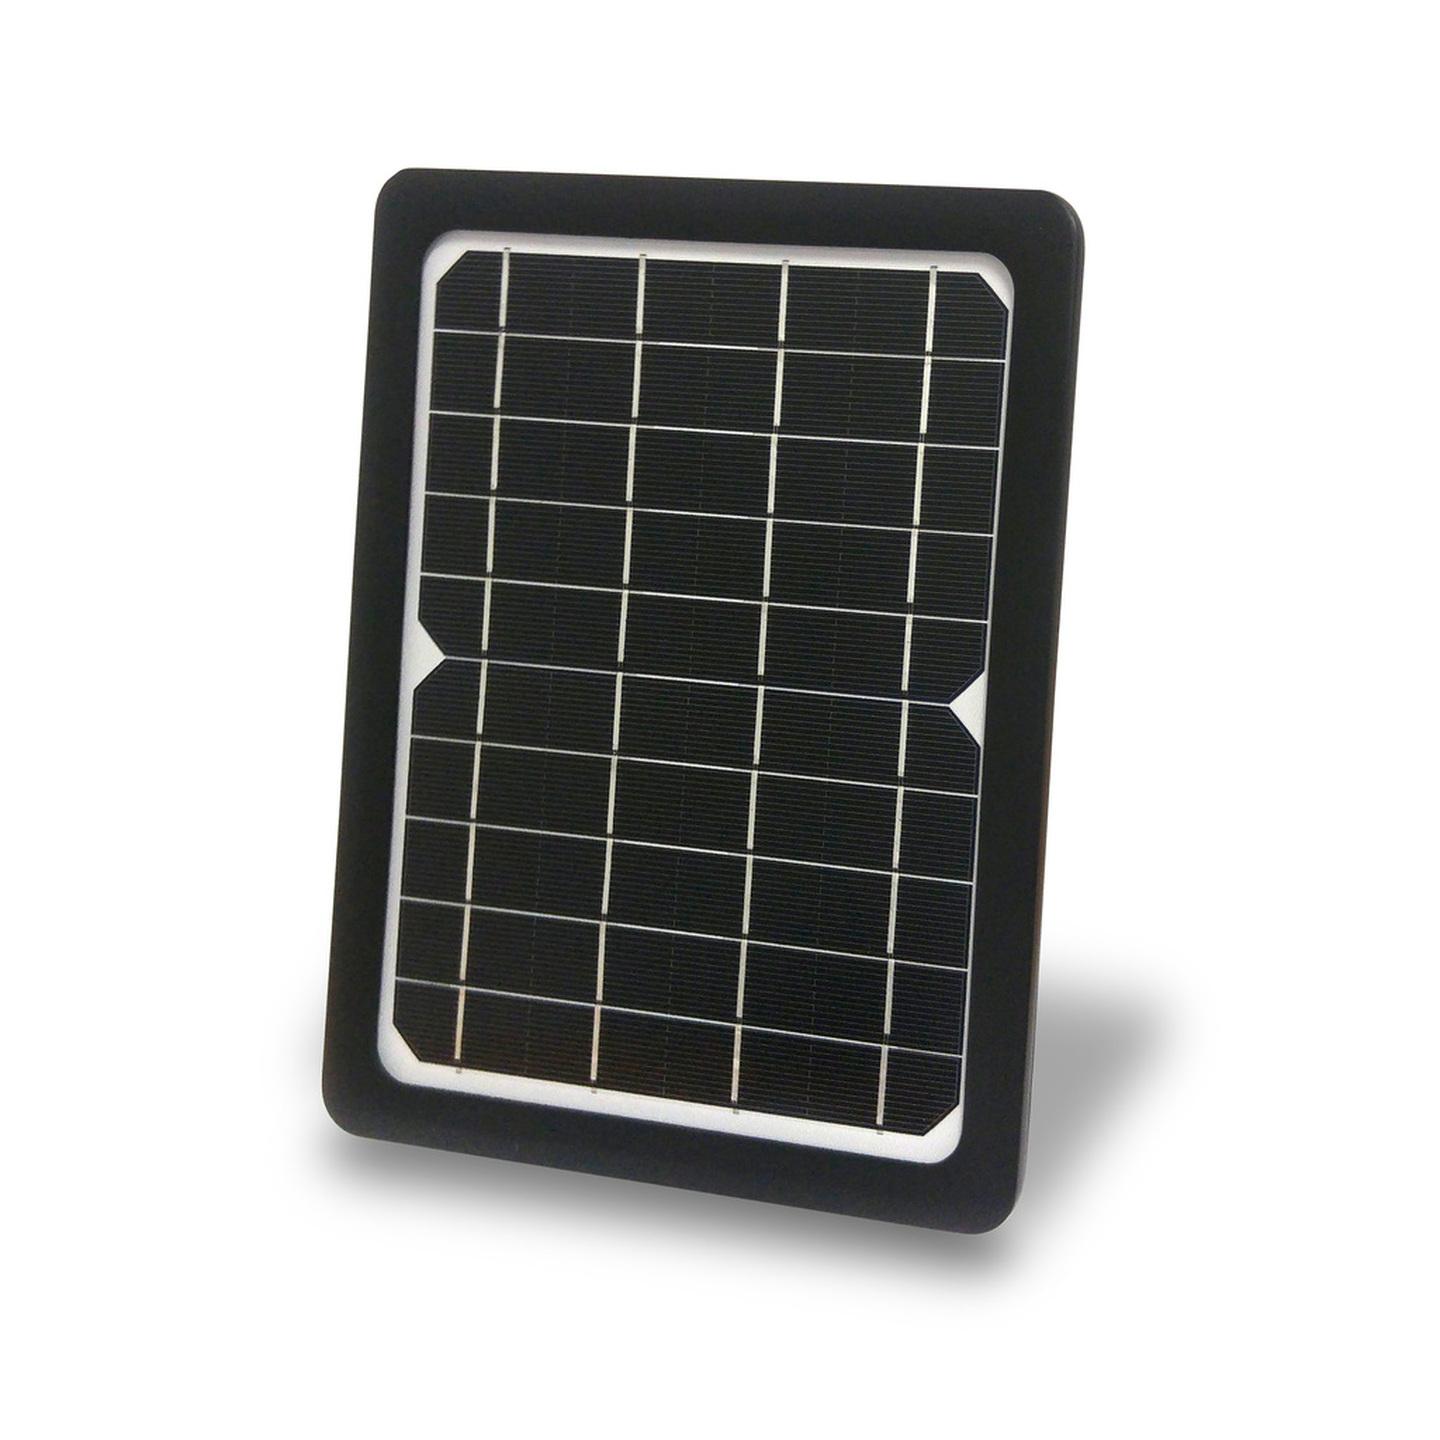 Swann Solar Panel to suit QV-9060/62 Battery Cameras